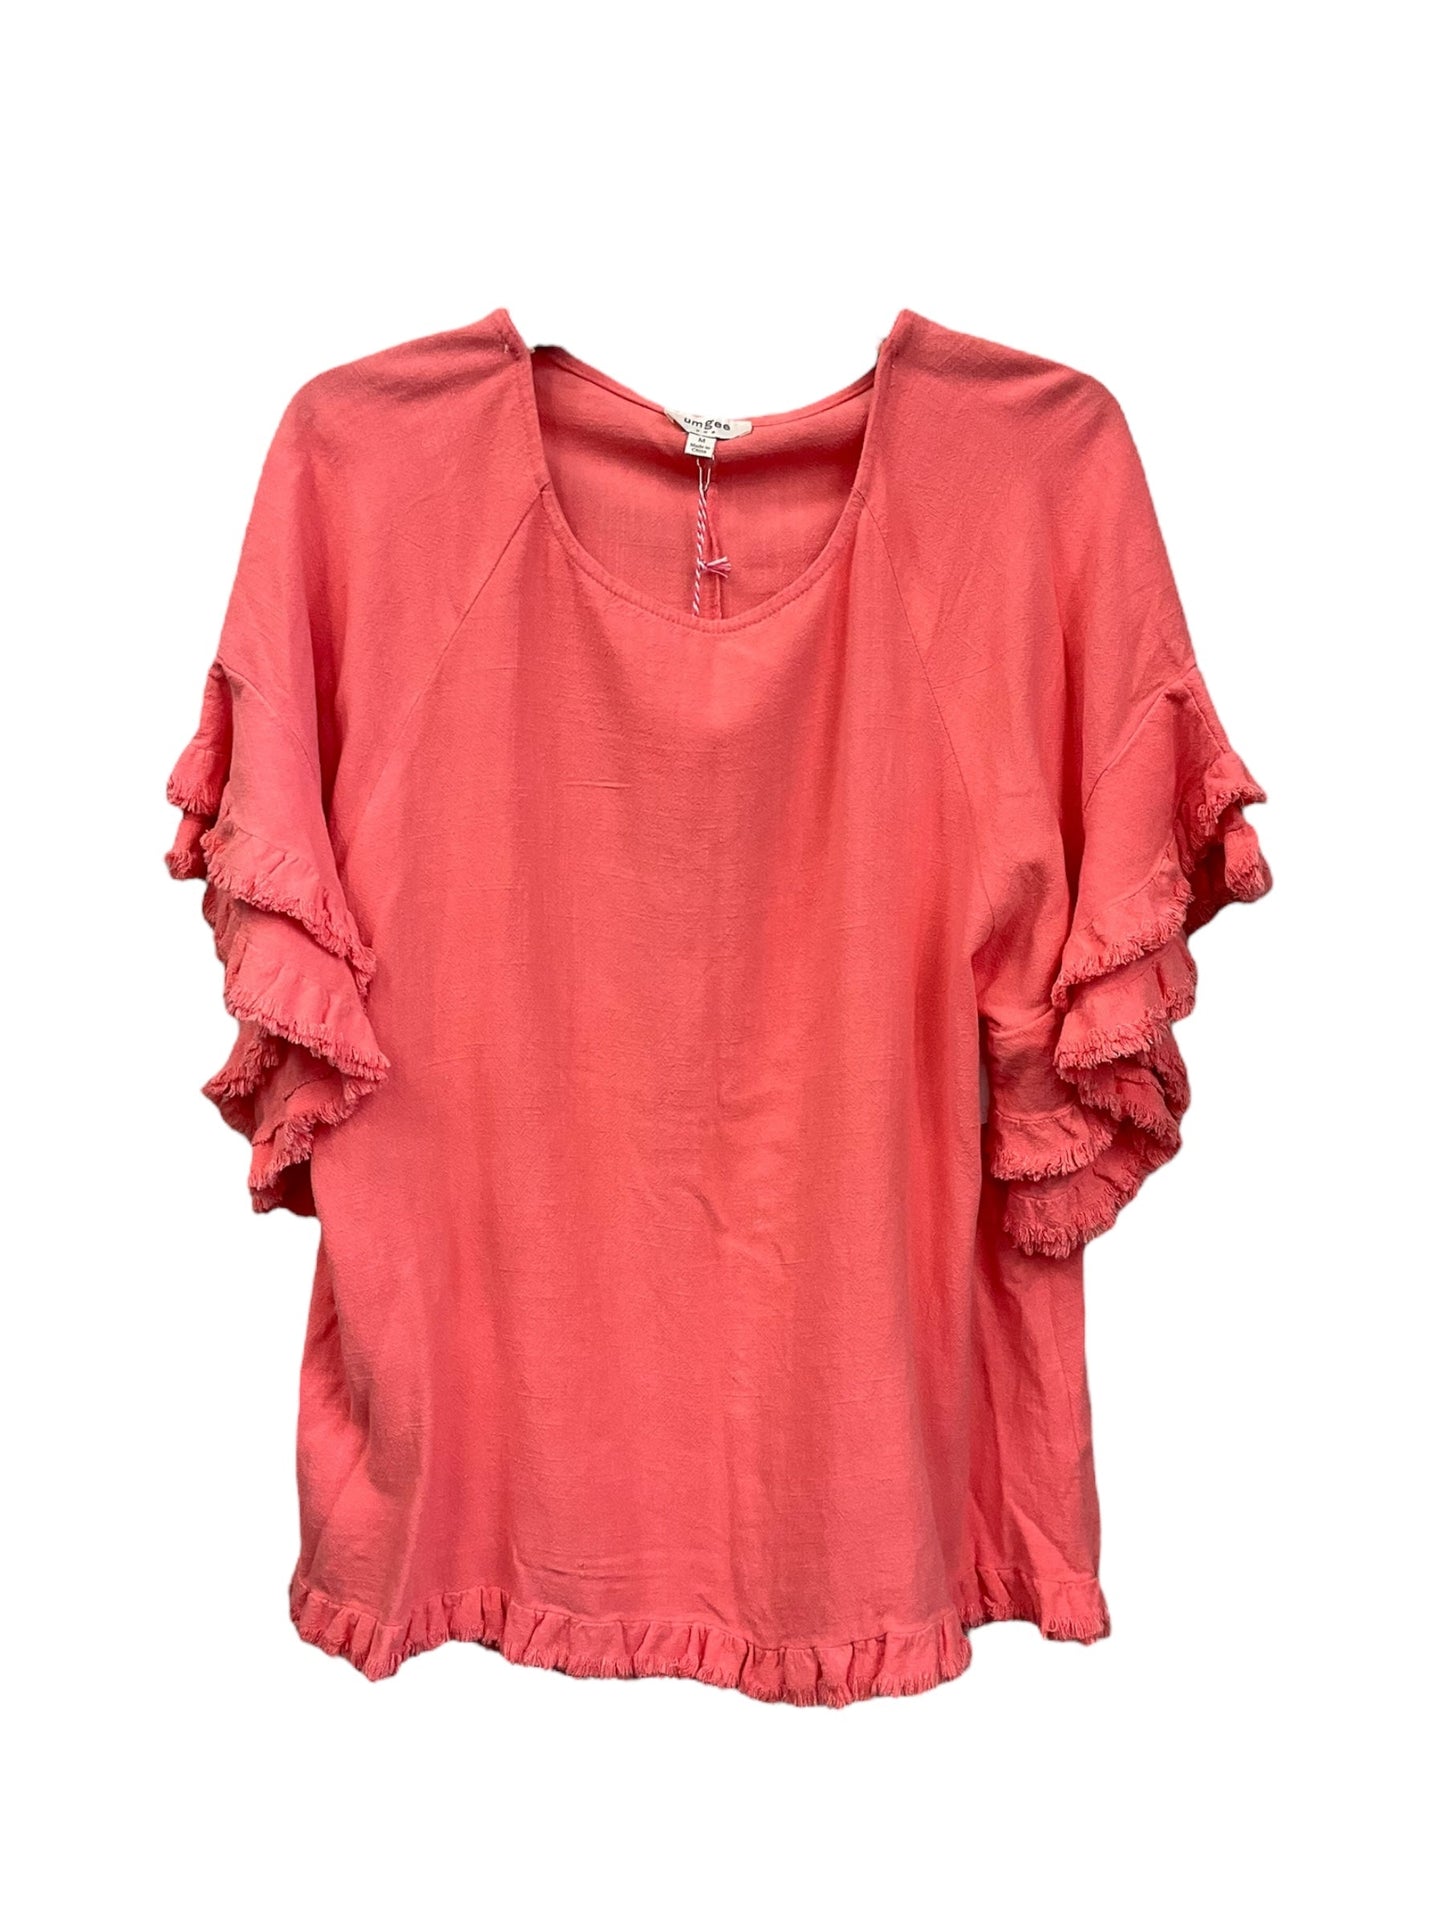 Coral Top Short Sleeve Umgee, Size M